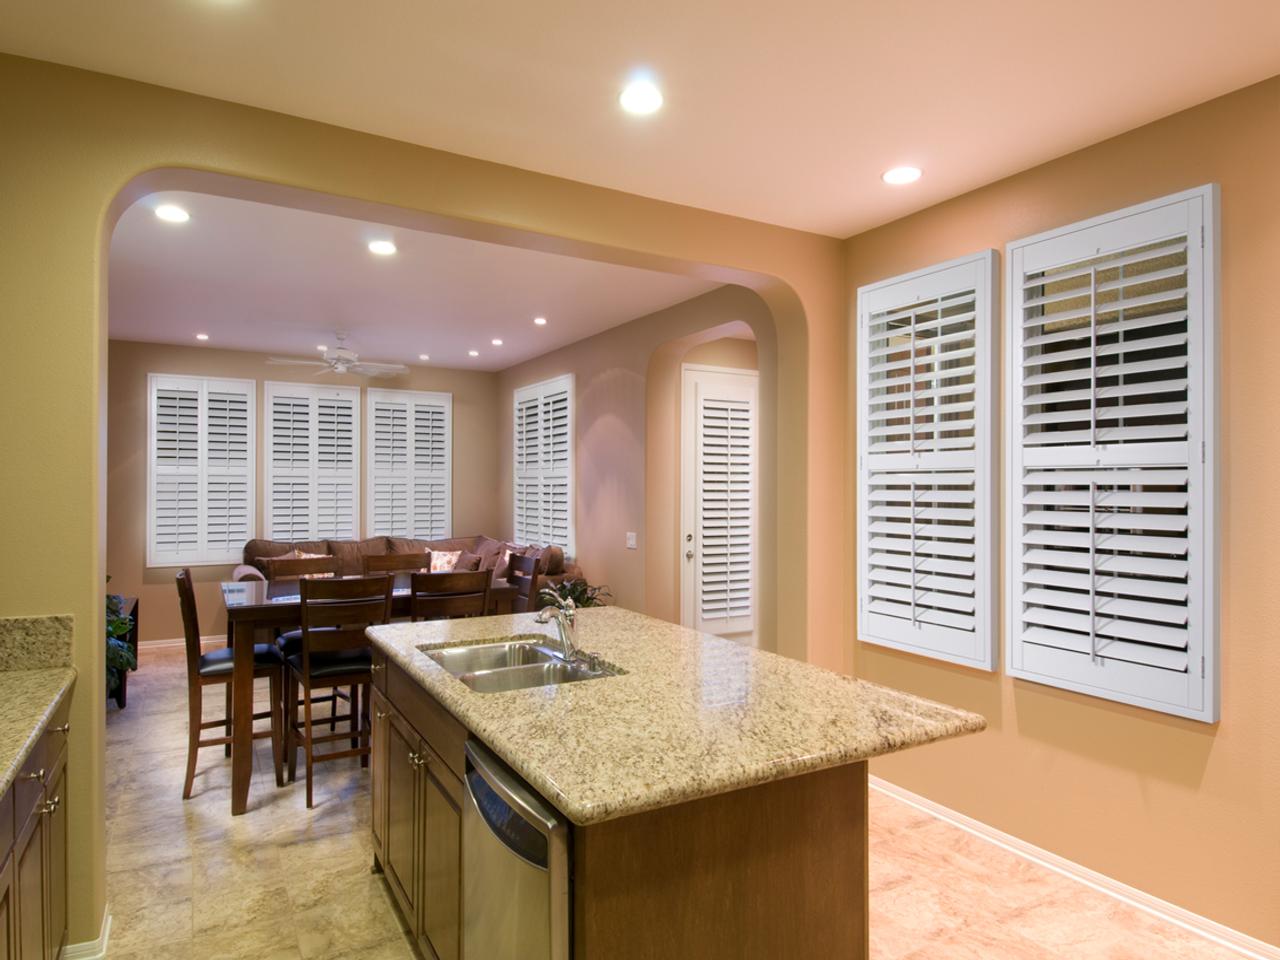 Open concept kitchen, dining and living room with windows and French Doors with interior shutters